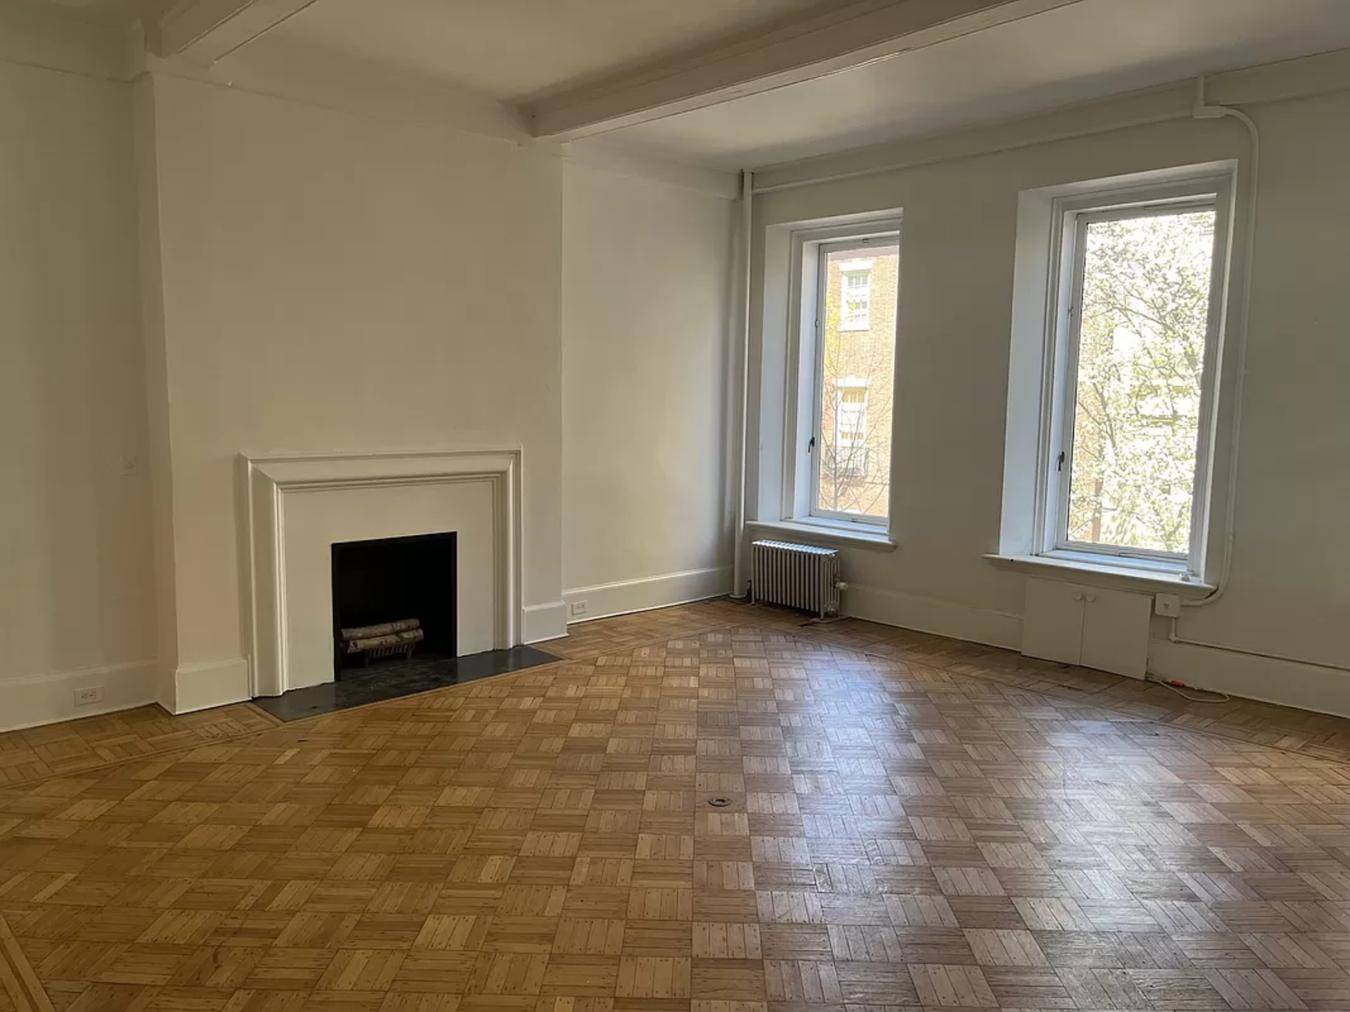 Welcome home to 3A, this bright and roomy studio is located on a paramount block in the heart of the Upper East Sideright off of 5th Avenue !